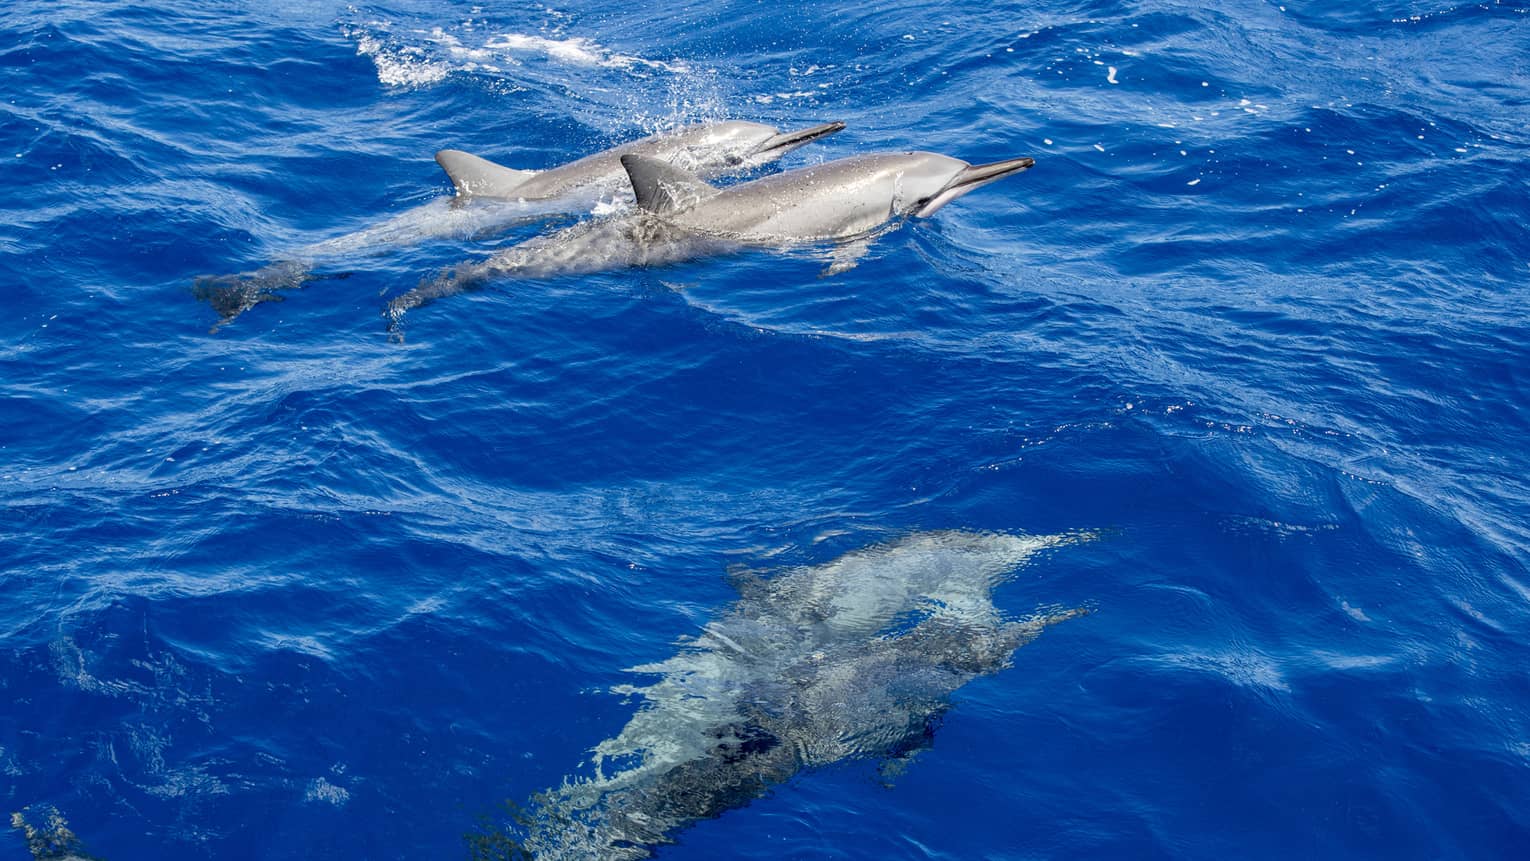 A group of dolphins in the water.